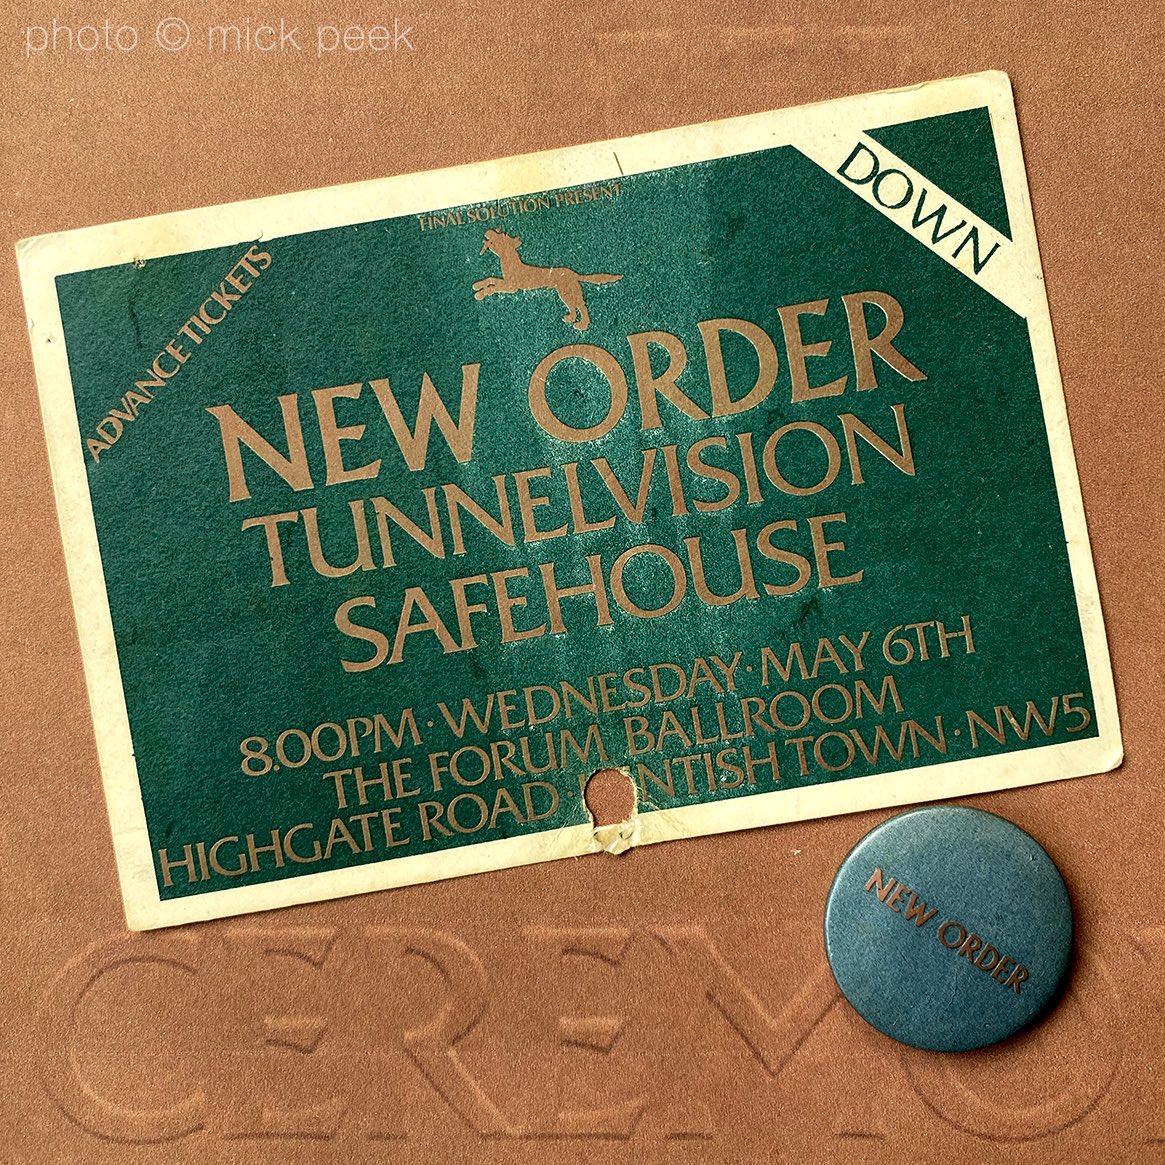 #TBT. Always regretted that I never got to see Joy Division but got to see New Order as soon as I could… this is my ticket & badge from the Forum Ballroom, in London, on 6th May 1981… 43 years ago this week!!!
 
#NewOrder #BernardSumner #PeterHook #GillianGilbert #StephenMorris